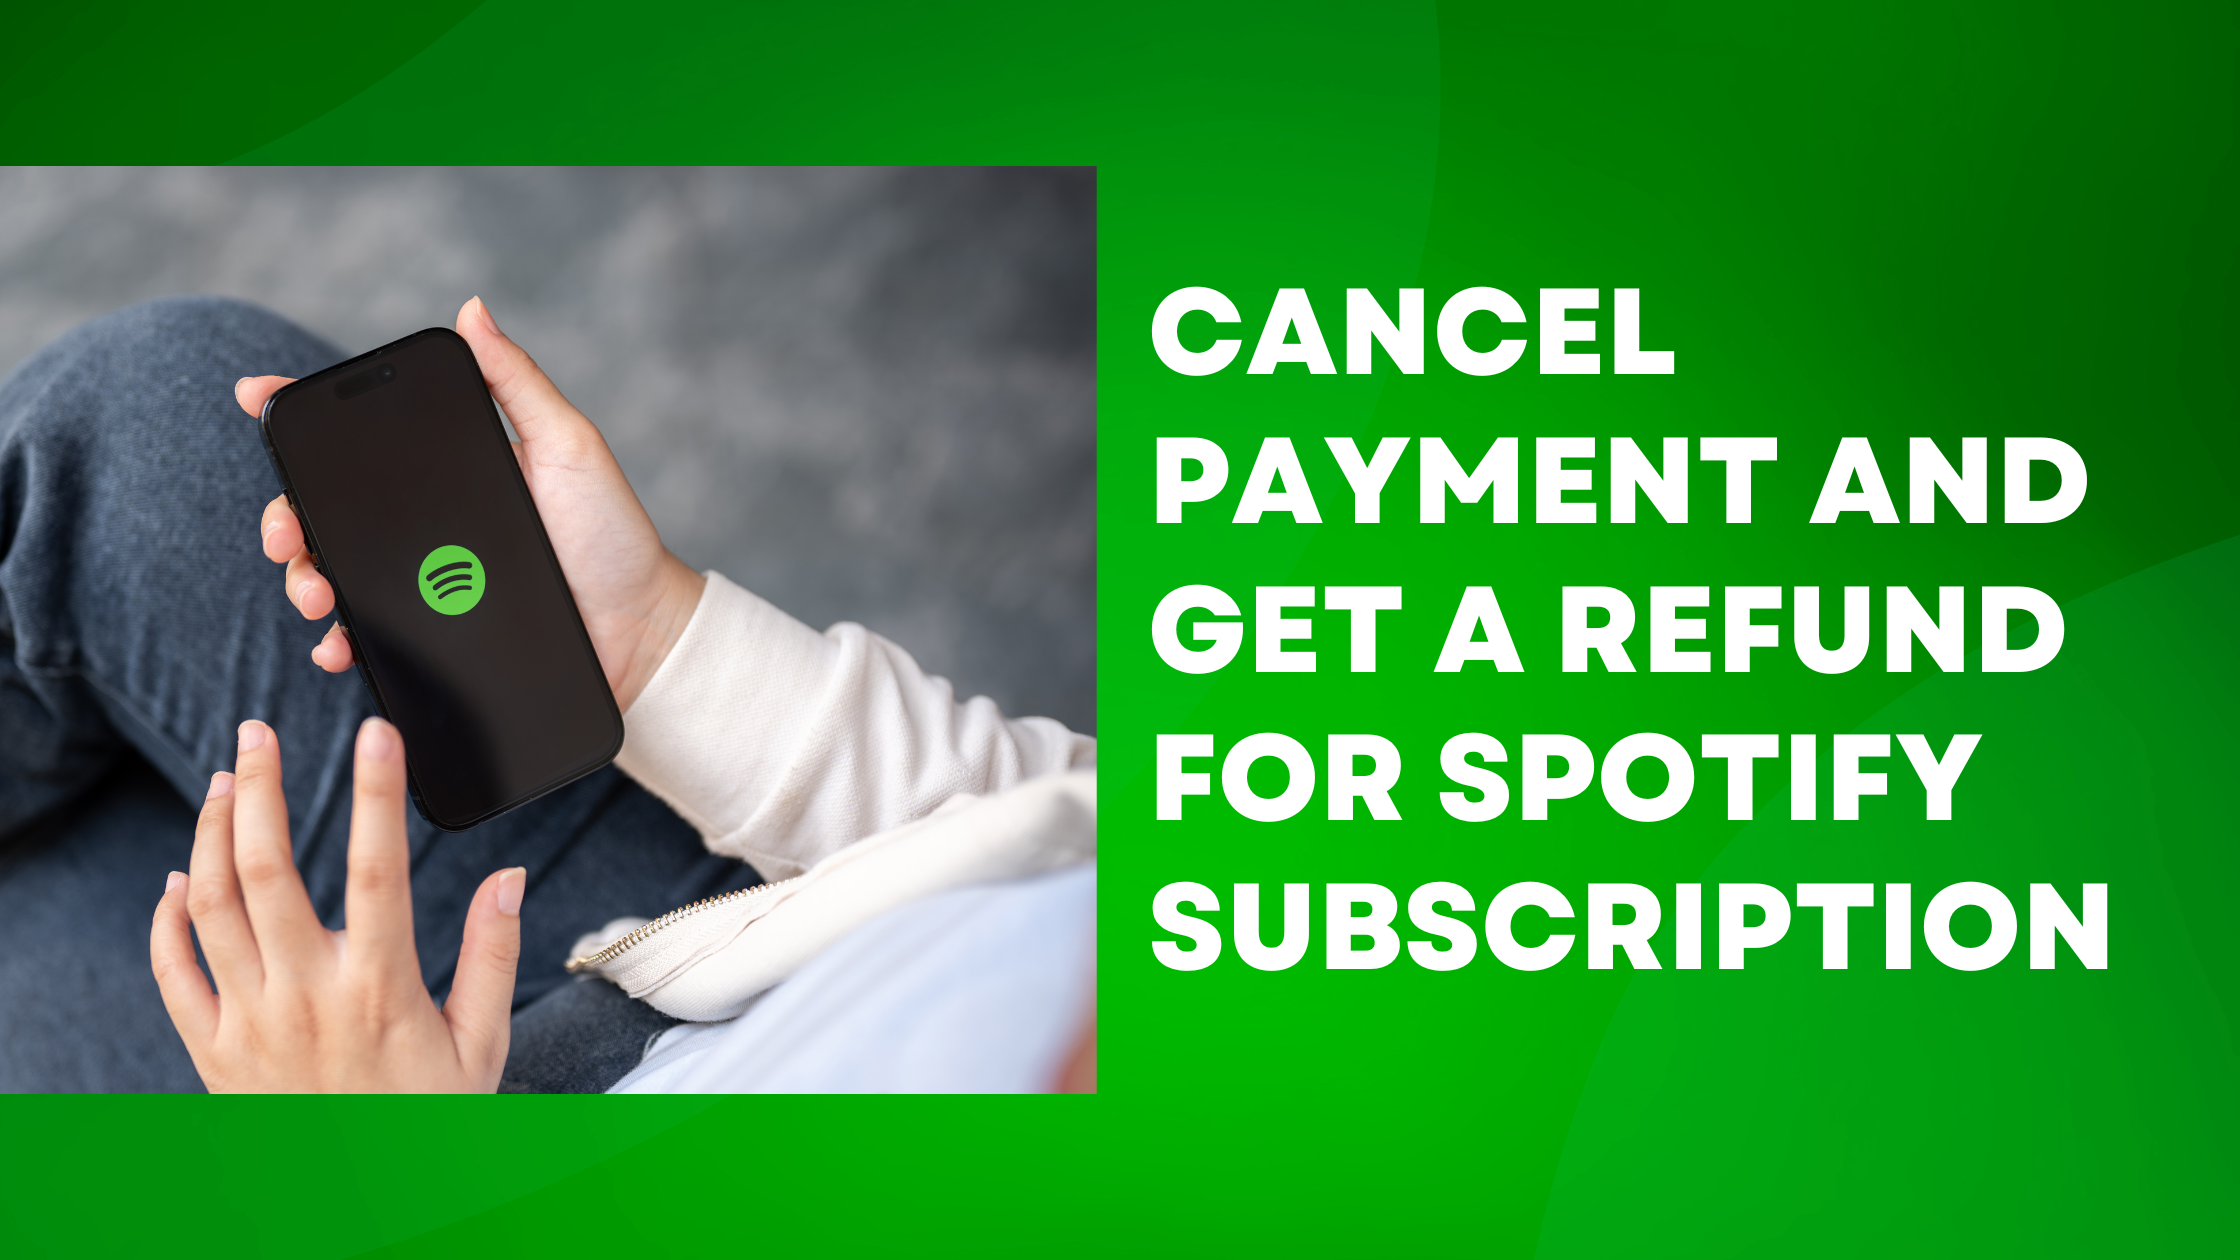 Cancel Payment and Get a Refund for Spotify Subscription